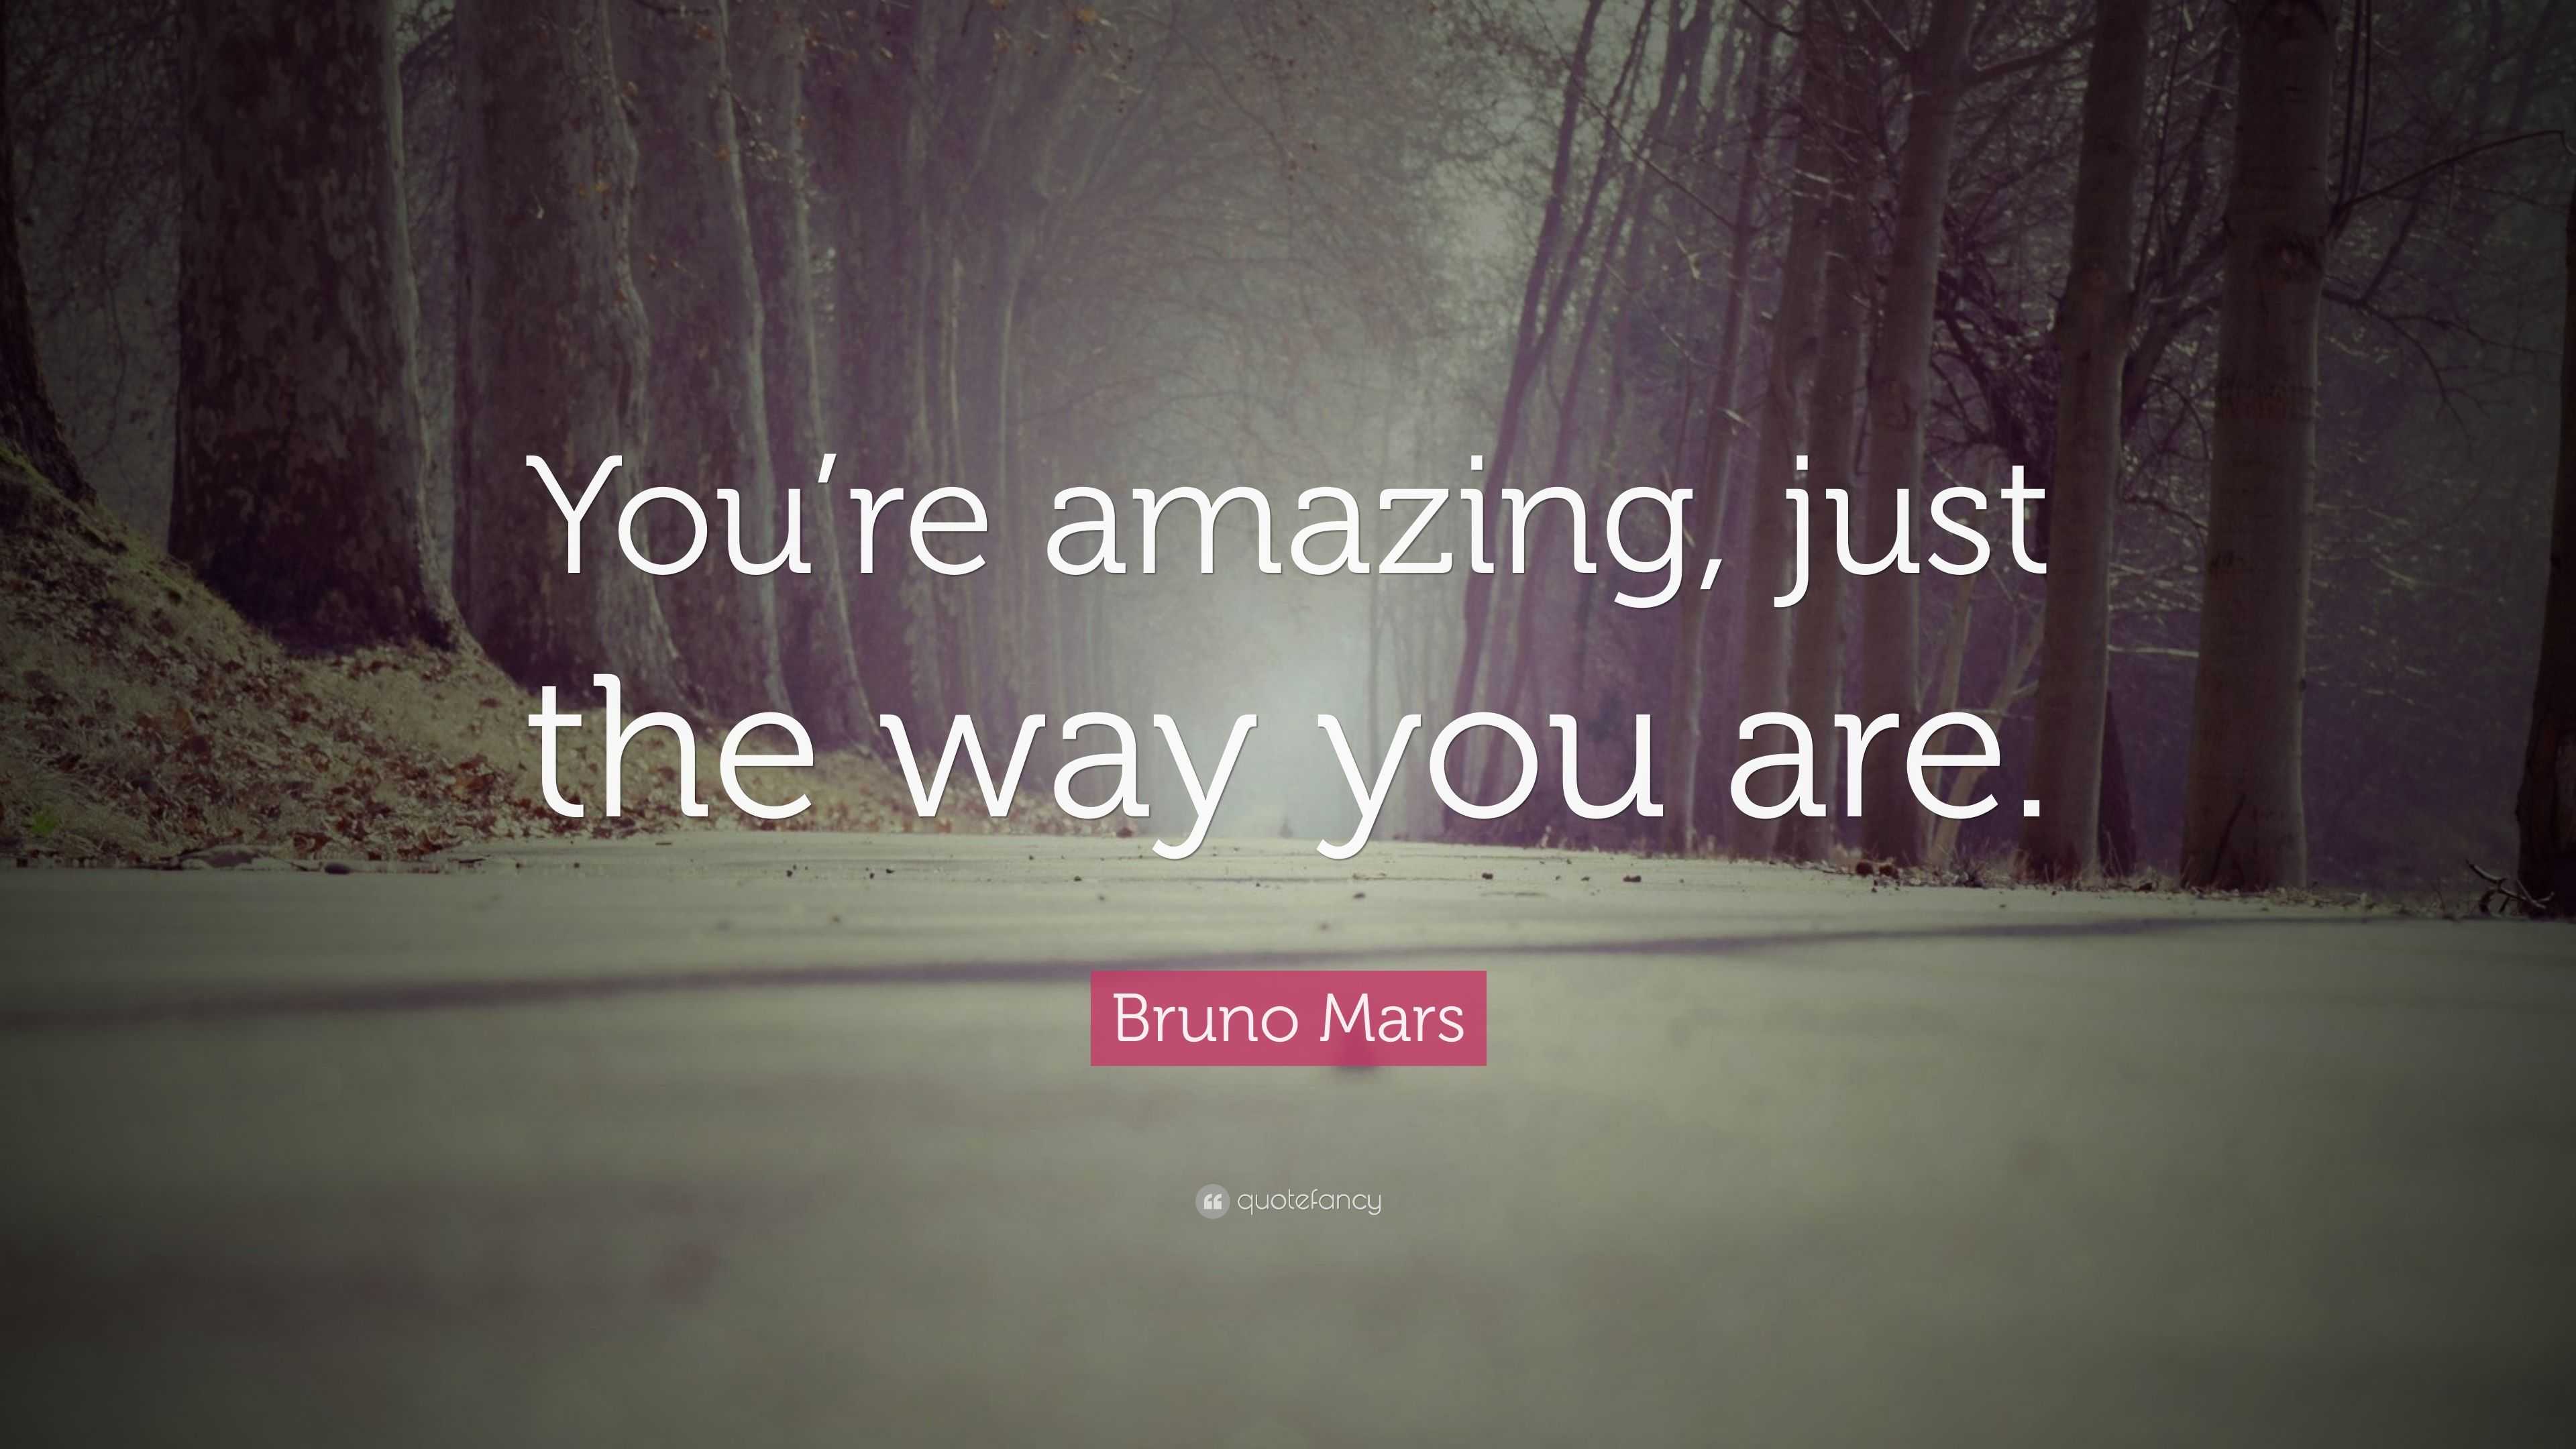 your amazing just the way you are